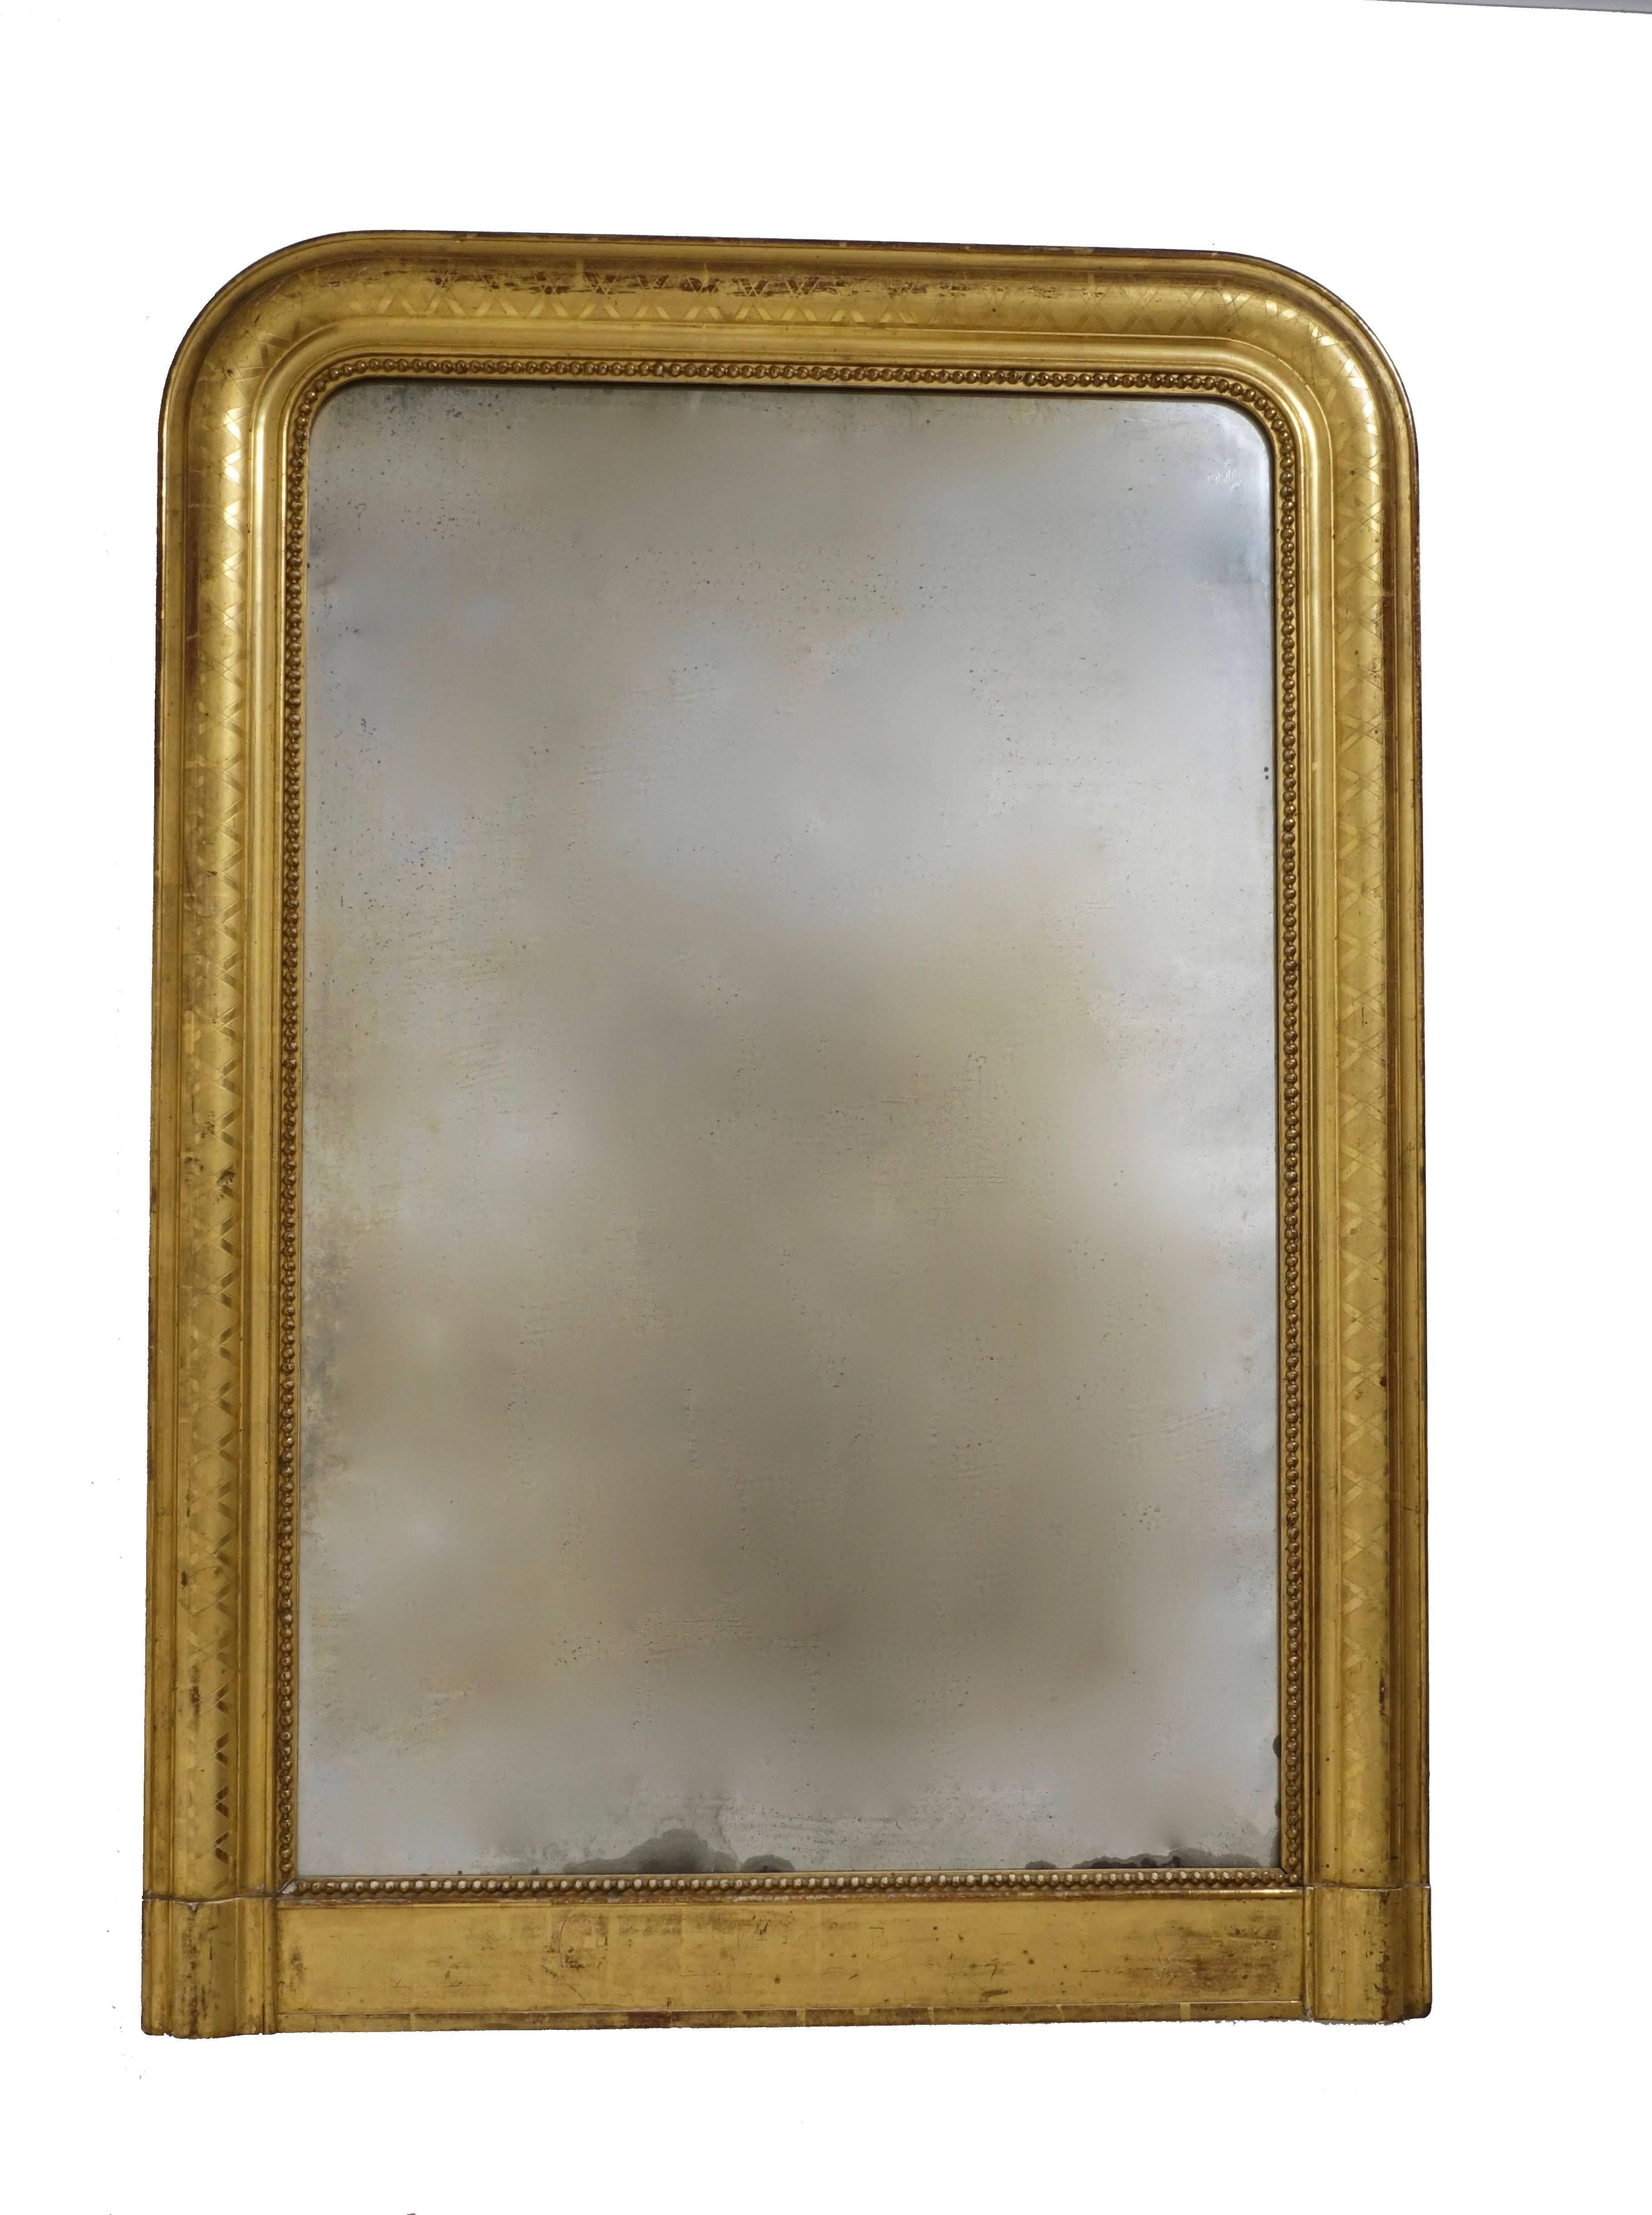 A Louis Philippe period beautifully gilt framed mantel mirror with etched X design on the bull nose molding and an inner band of dots around the original aged mirror plate, France, circa 1840.